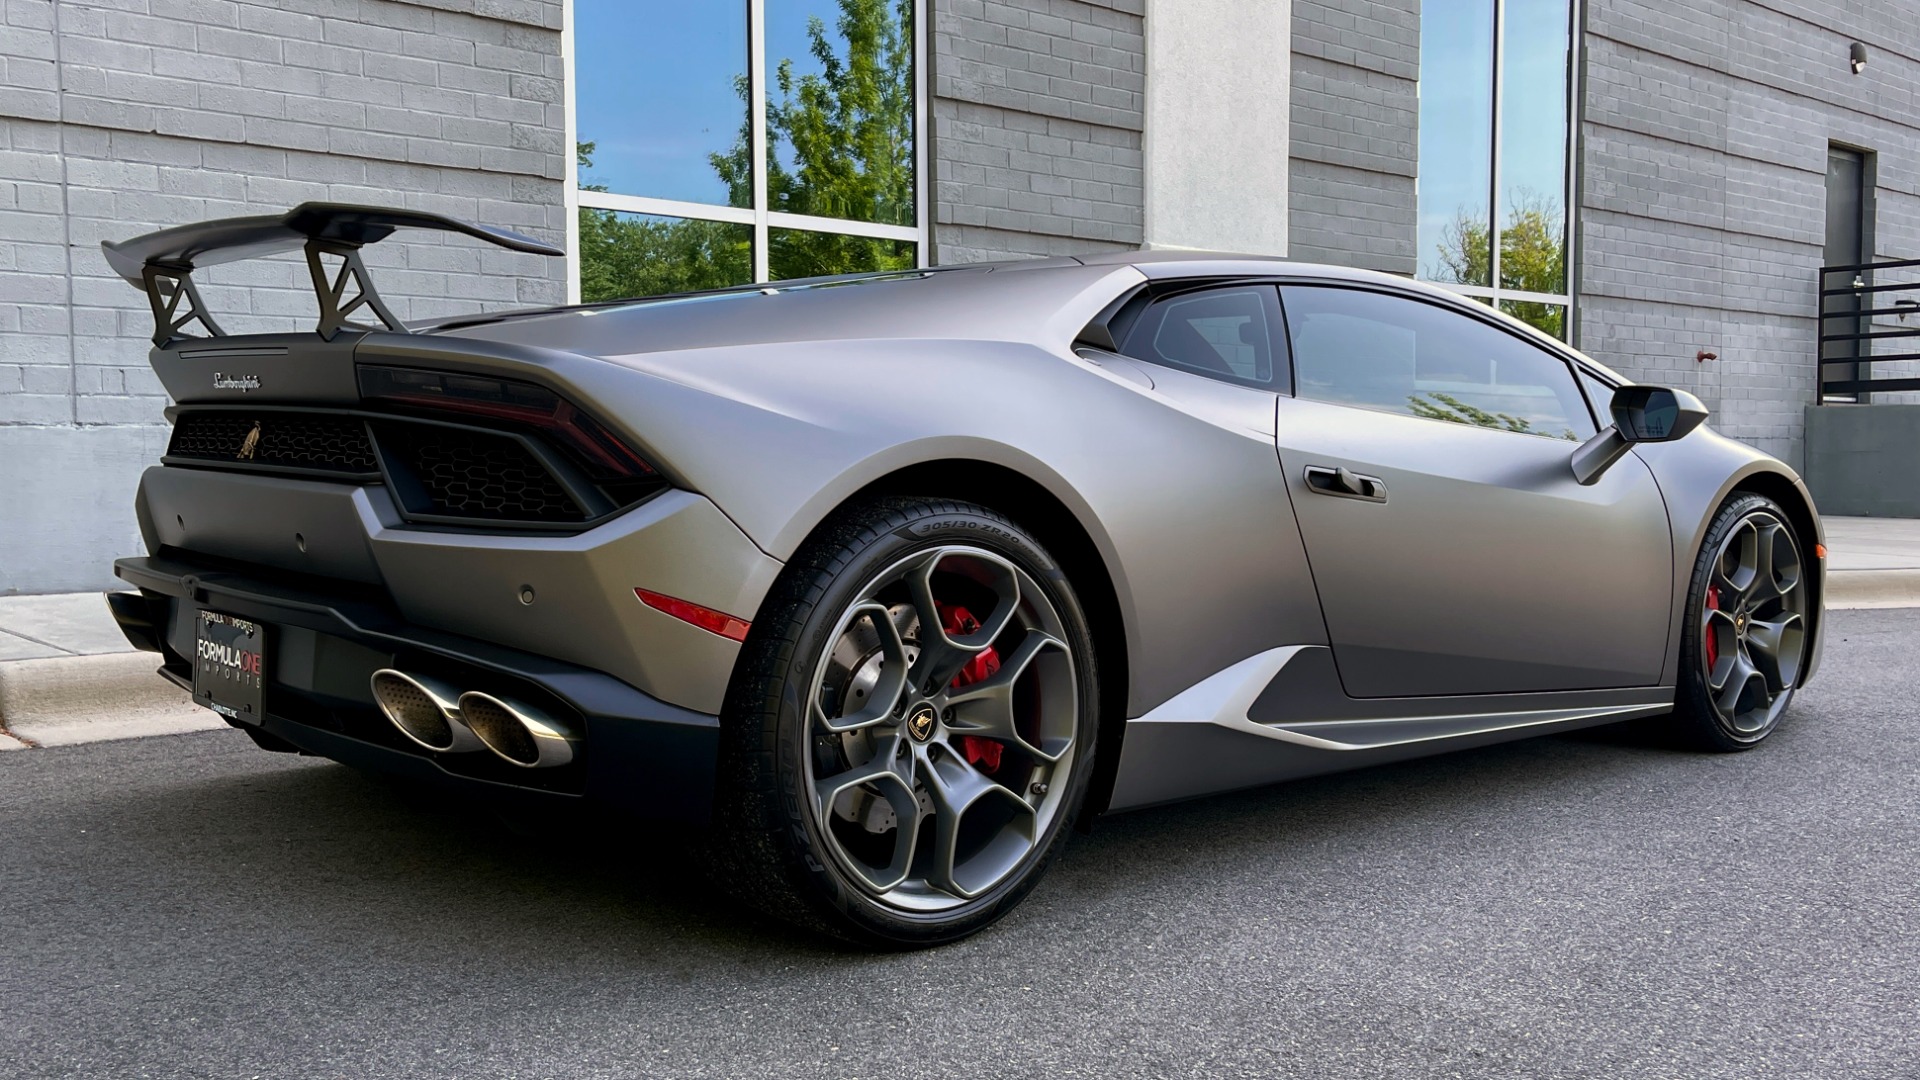 Used 2019 Lamborghini HURACAN LP 580-2 / 5.2L V10 (571HP) / 7-SPD AUTO / RWD / REARVIEW for sale $254,999 at Formula Imports in Charlotte NC 28227 2